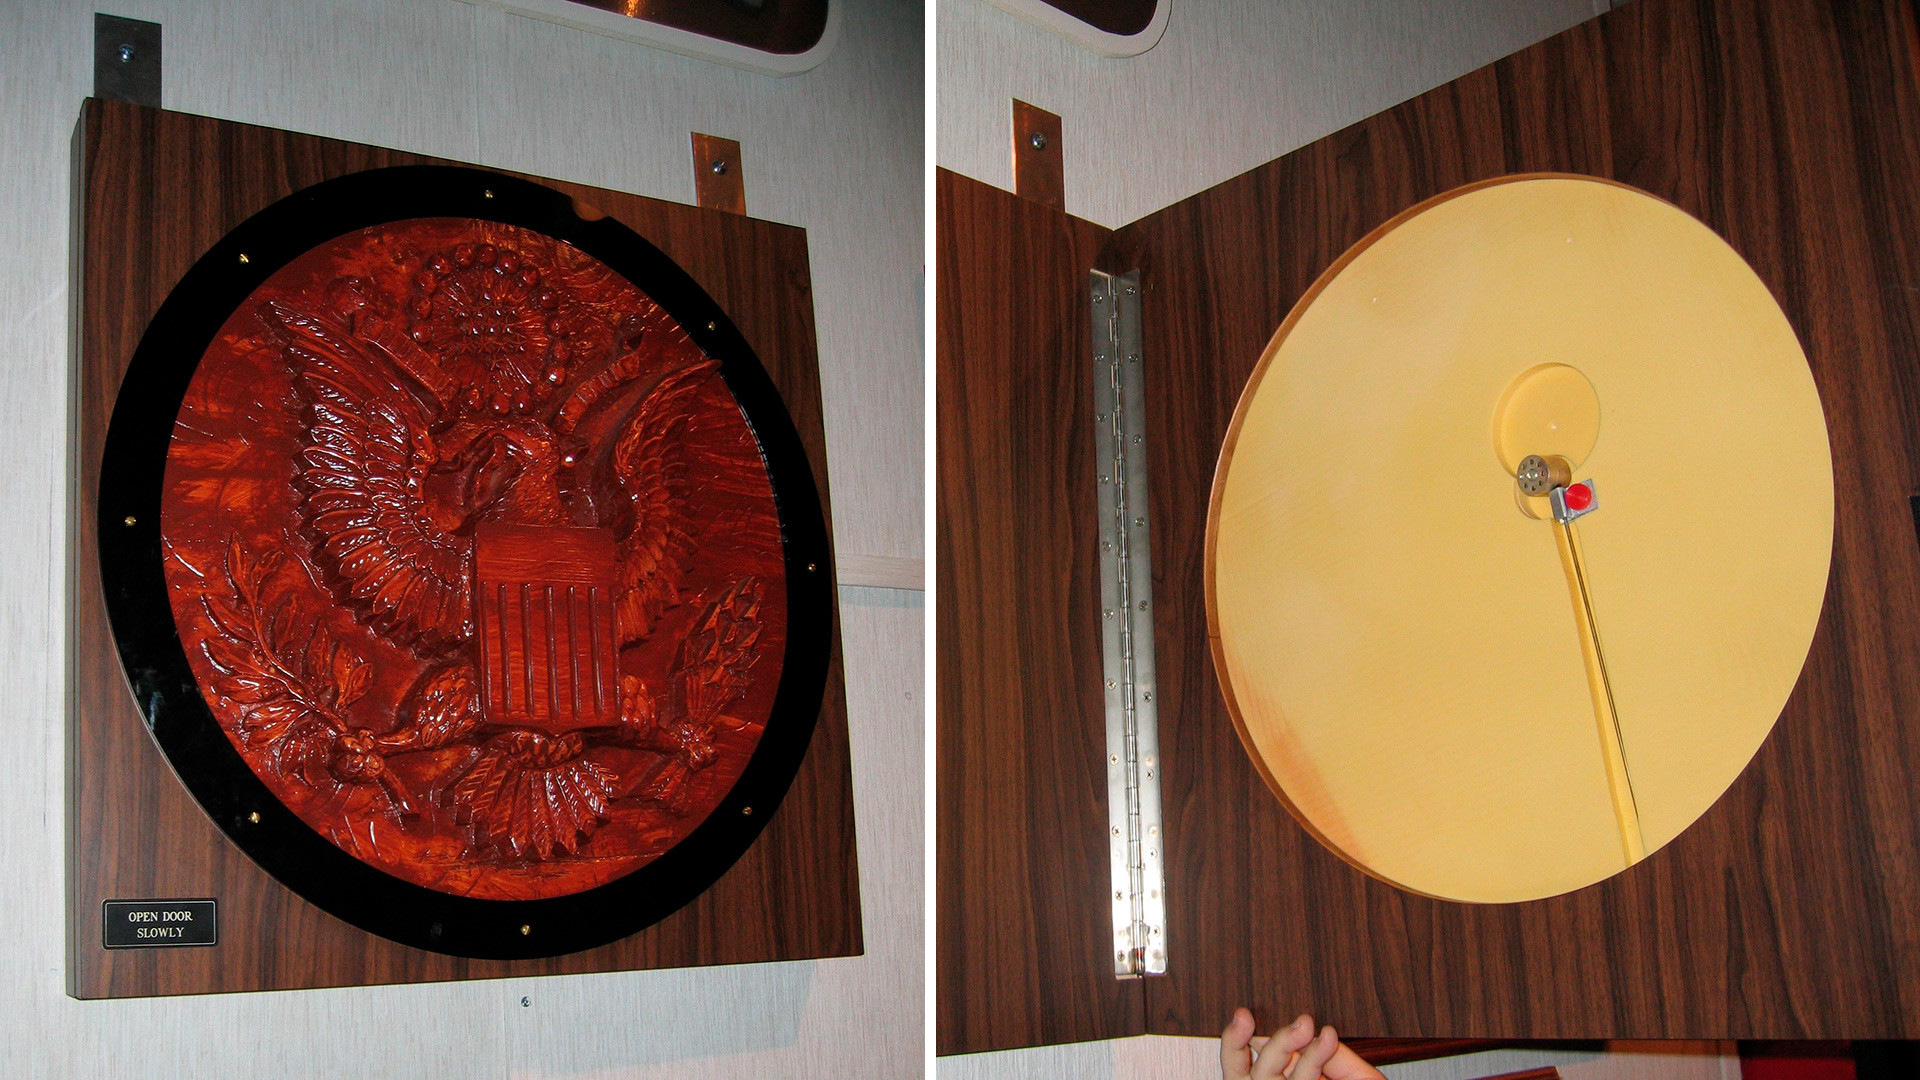 A replica of a bugged US Great Seal on display at the National Cryptologic Museum